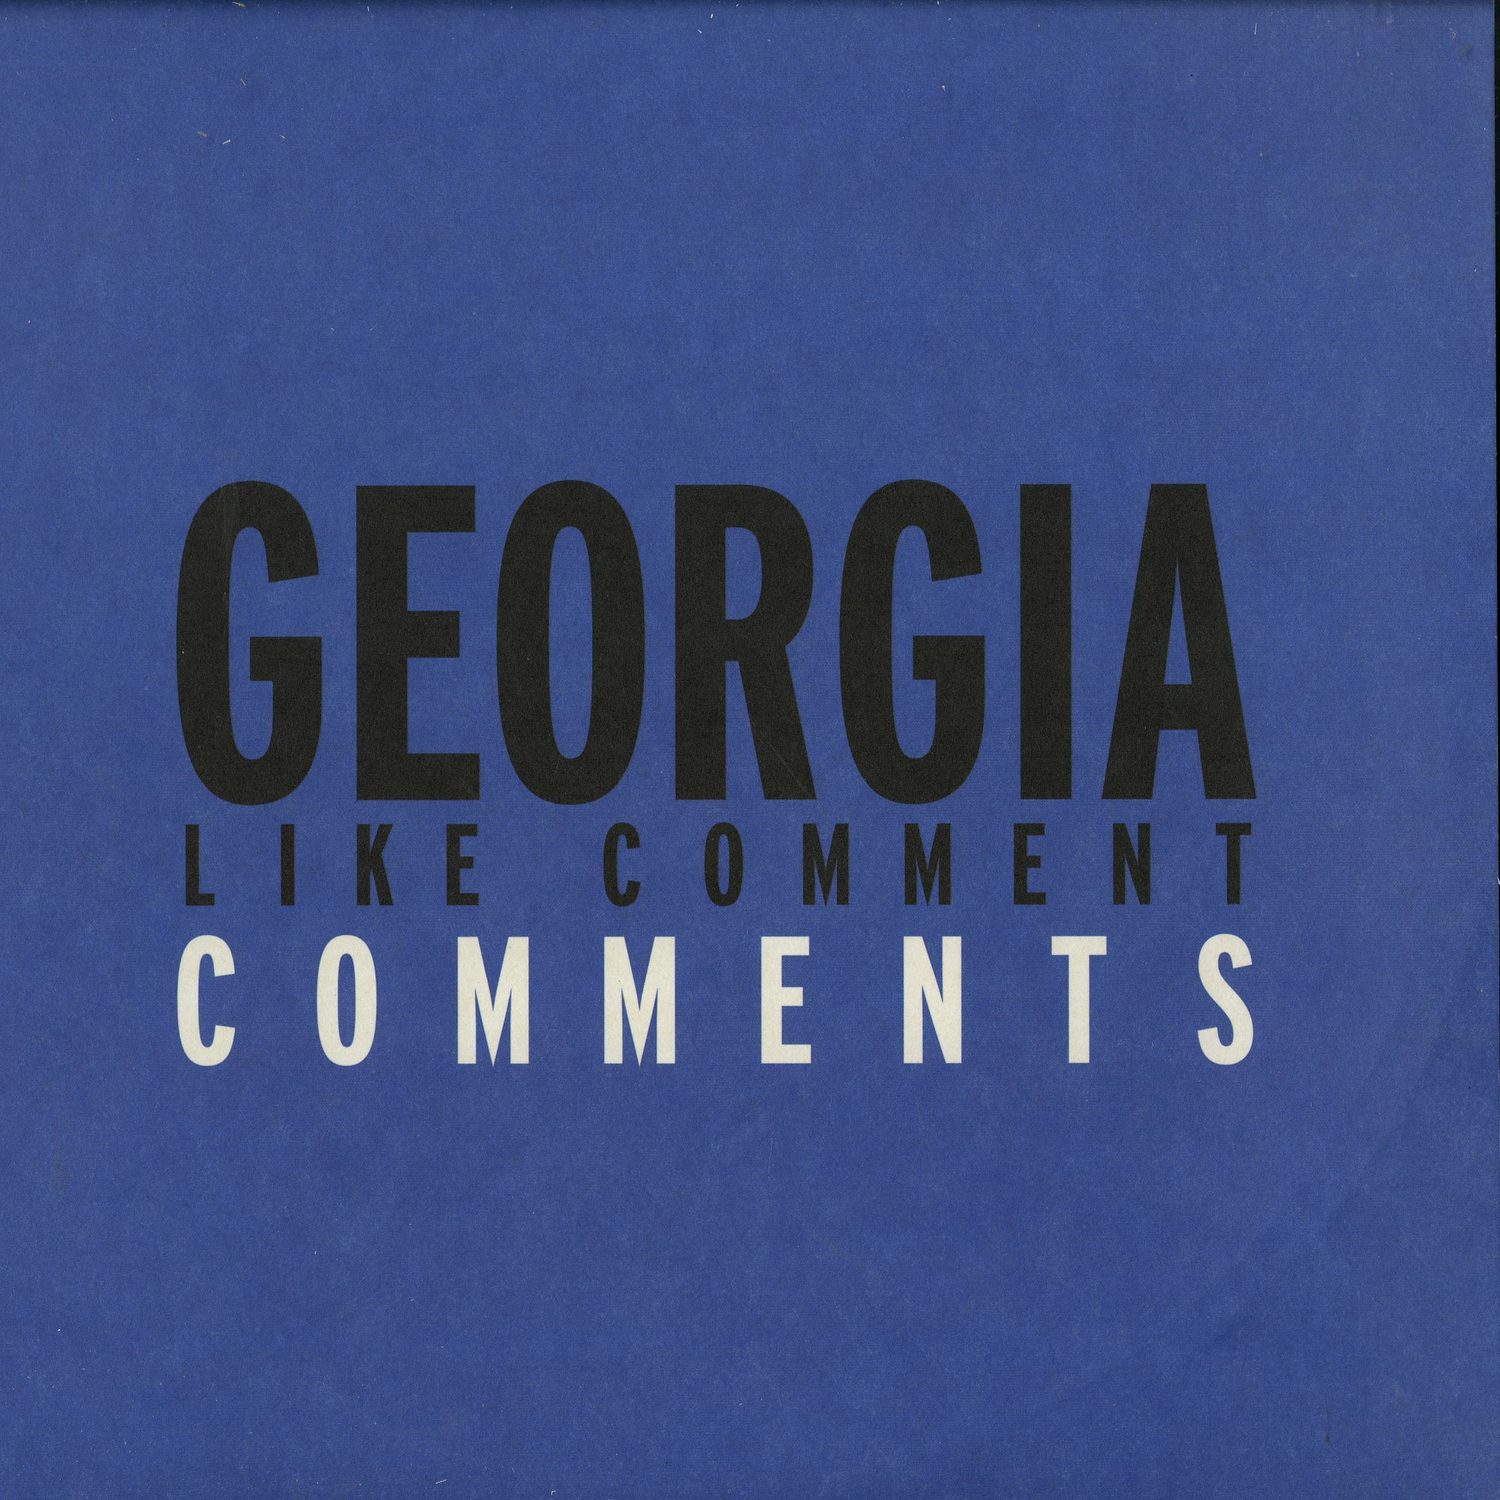 Georgia - LIKE COMMENT COMMENTS BY AFRIKAN SCIENCES, THOMAS BULLOCK, BRYCE HACKFORD, RVNG INTL.